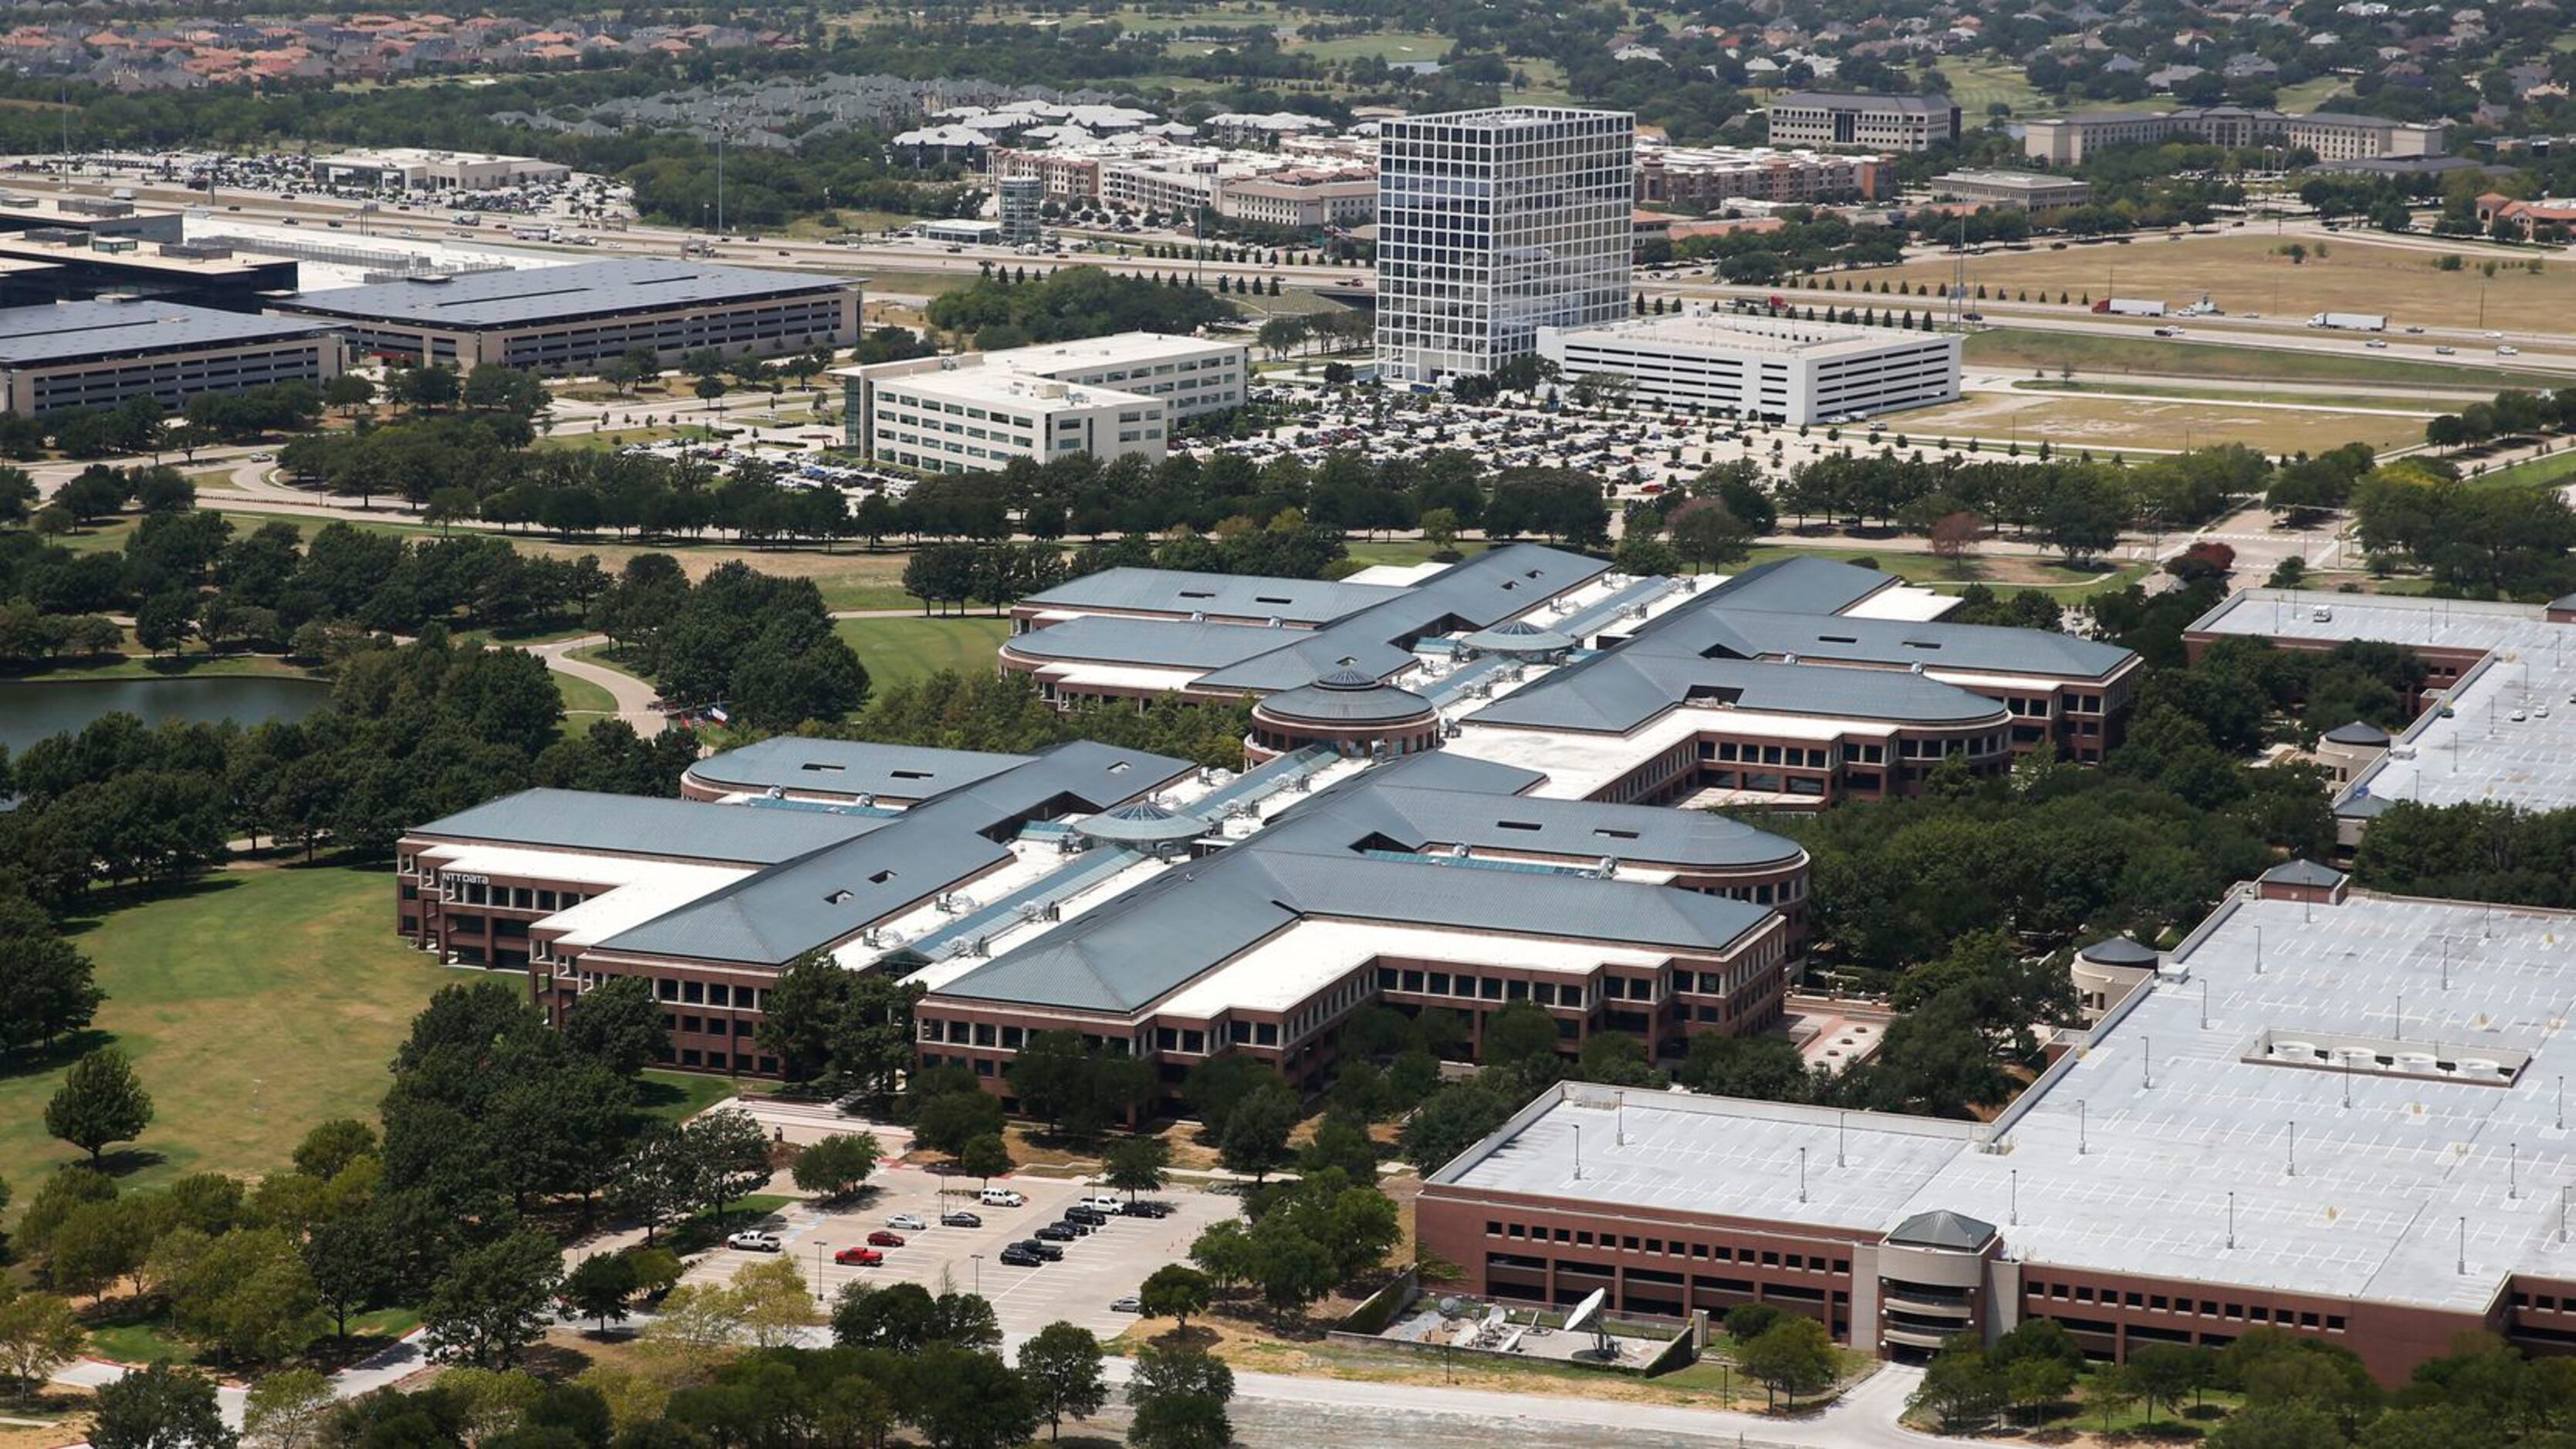 J.C. Penney is moving back into its former Plano headquarters